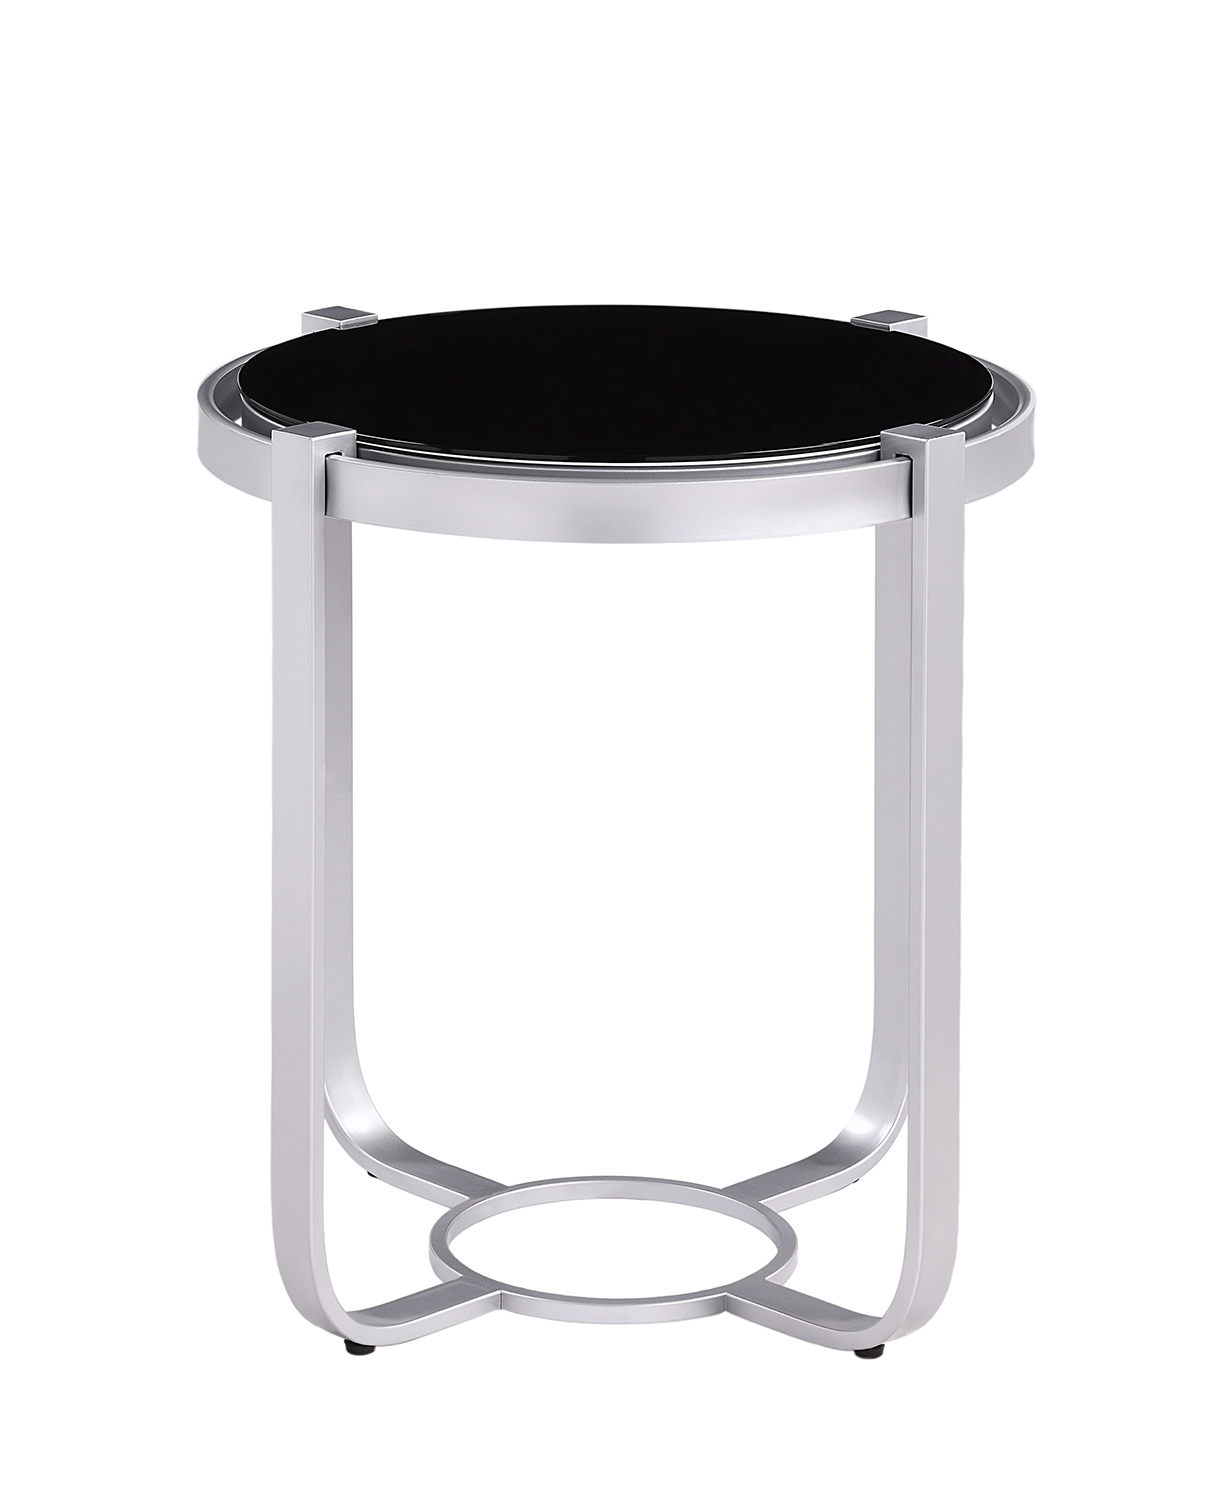 Homelegance Caracal Round End Table with Black Glass Insert - Silver